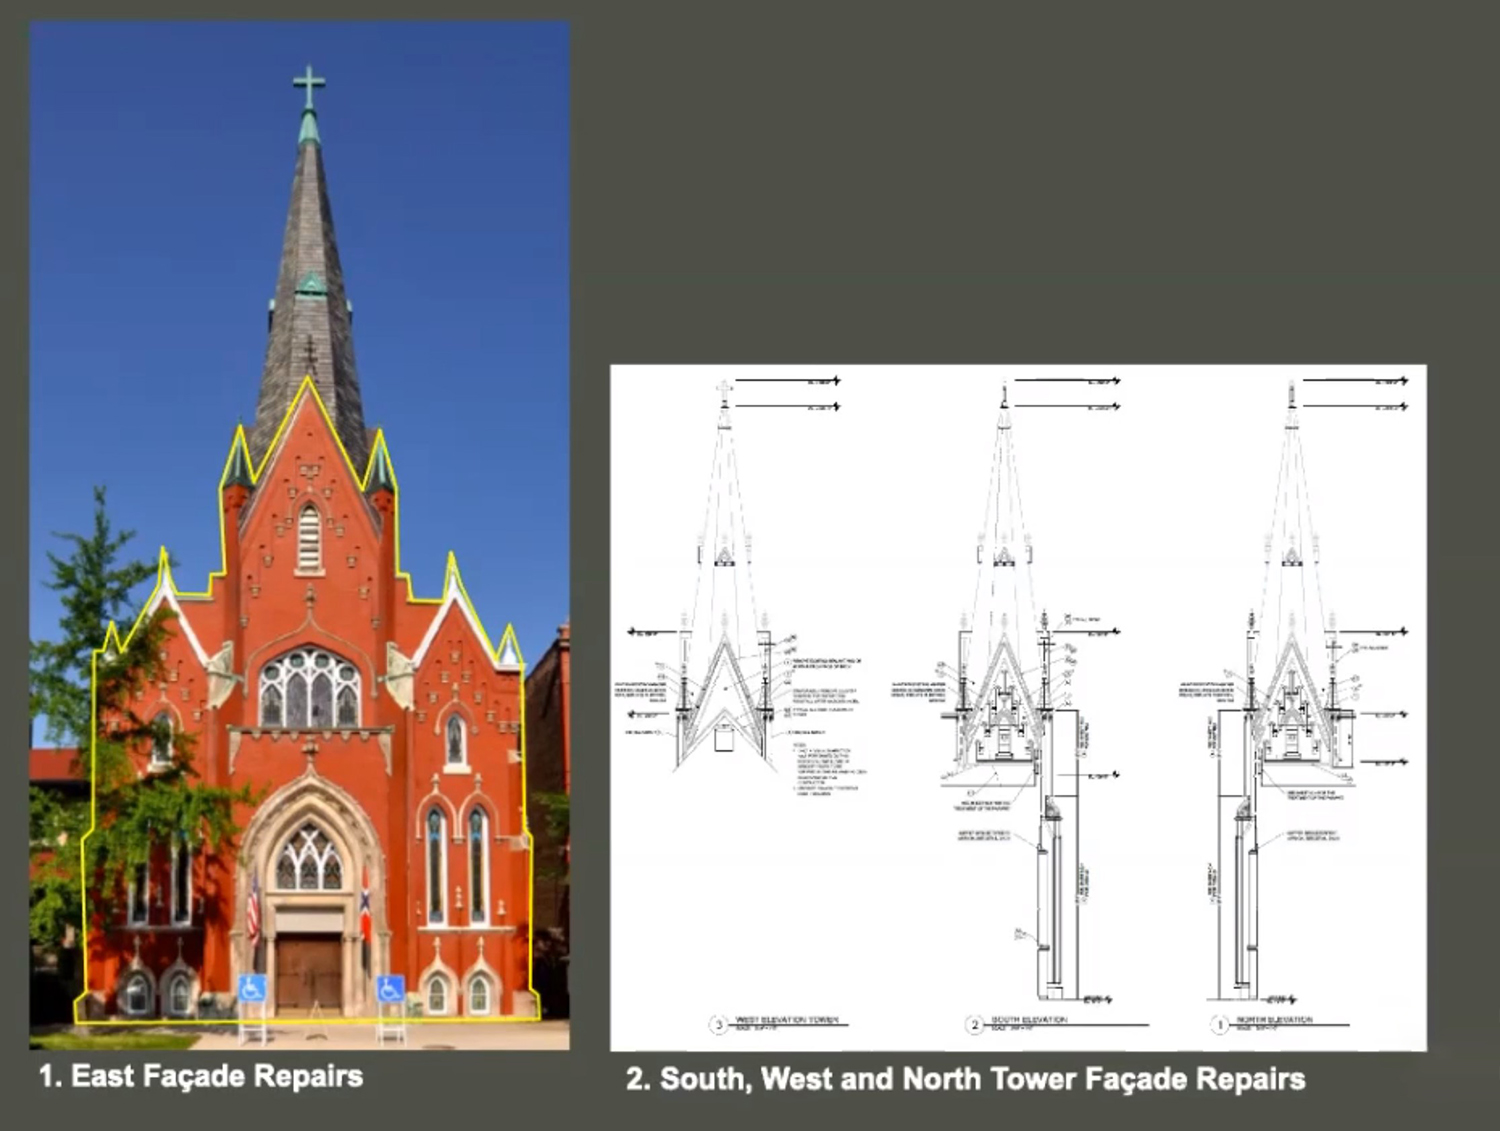 Planned Facade Repairs. Drawings by Wauters Design